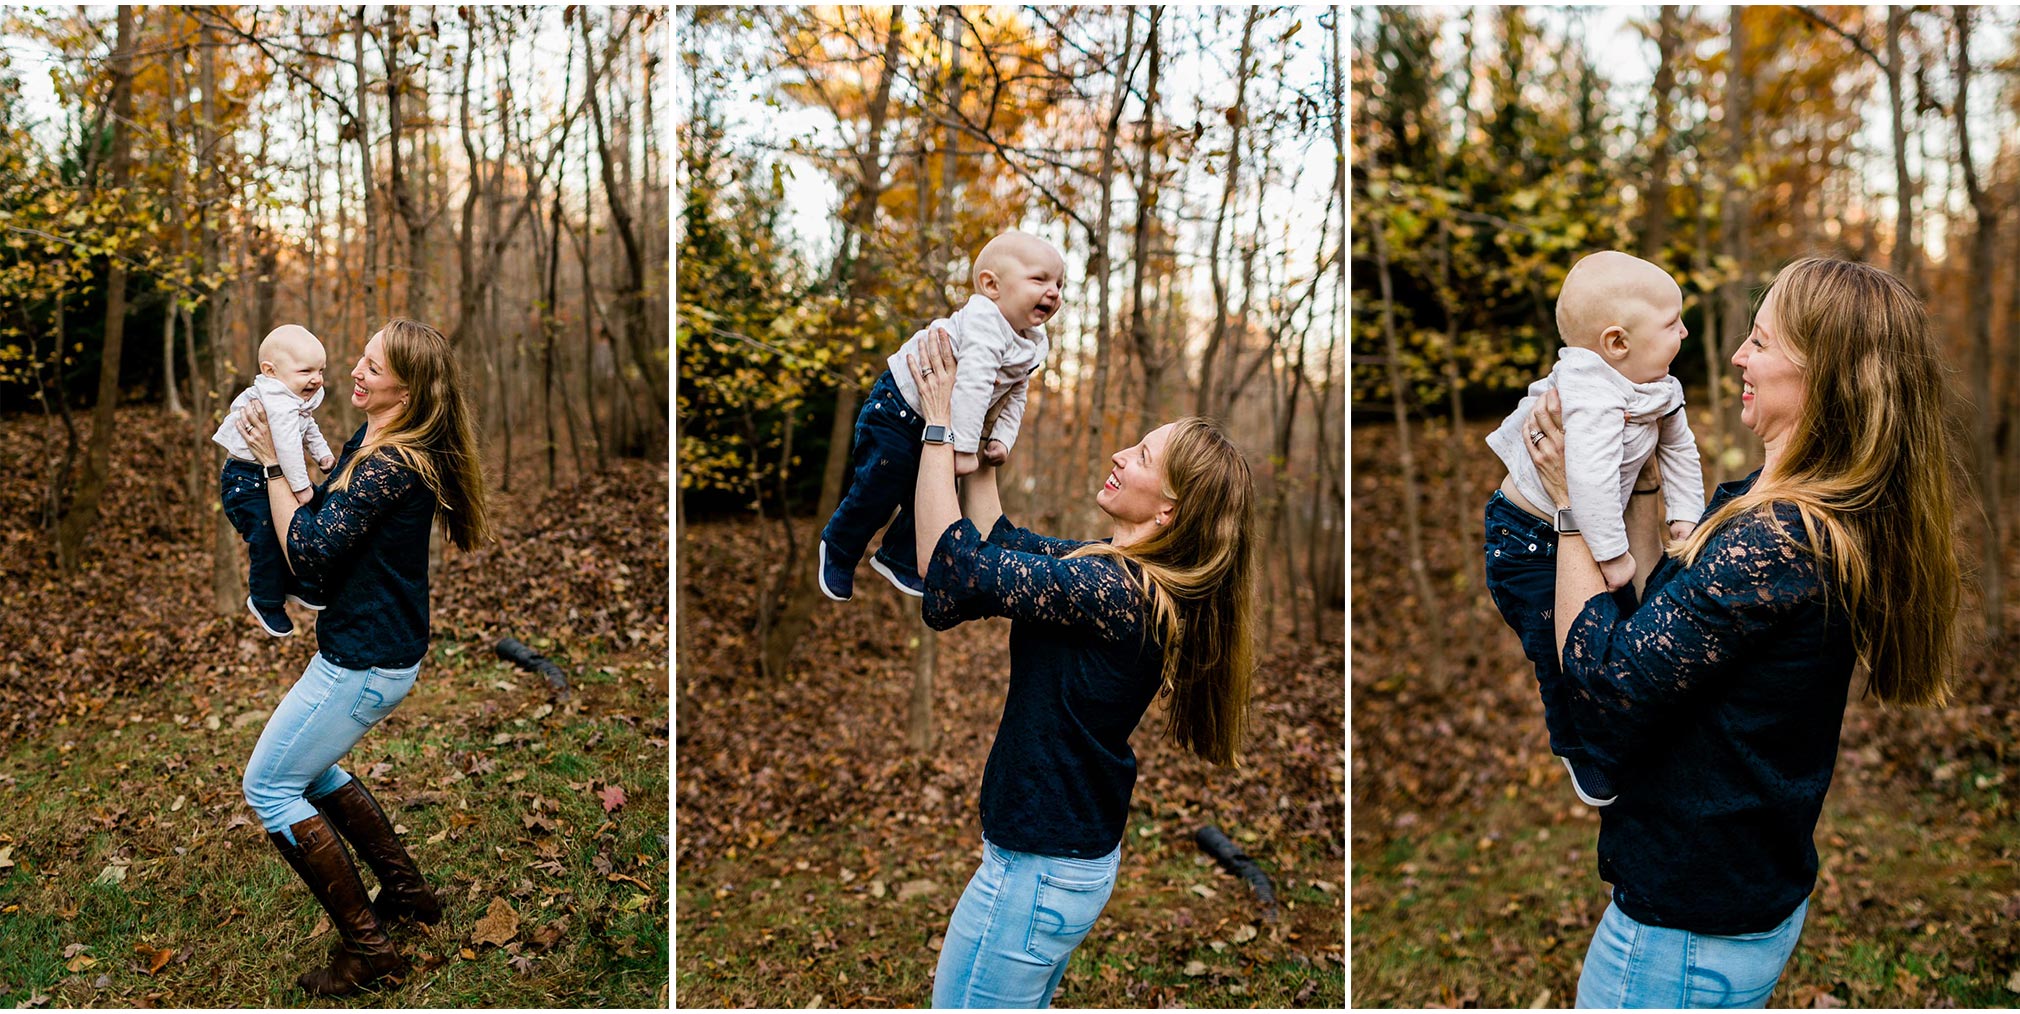 Mom laughing and playing with baby boy | By G. Lin Photography | Durham Family Photography